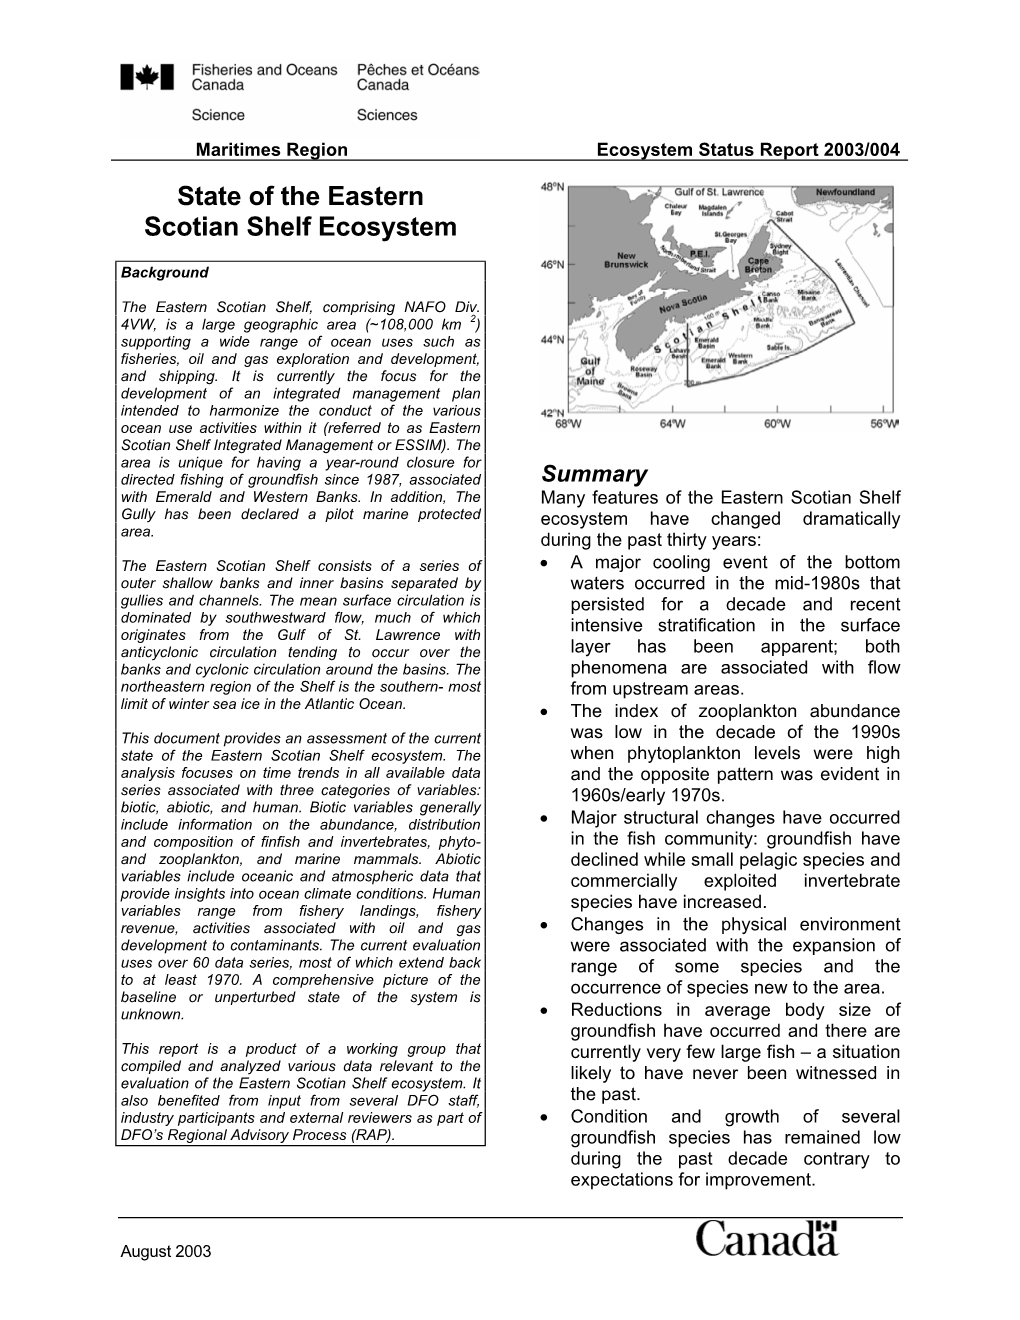 State of the Eastern Scotian Shelf Ecosystem